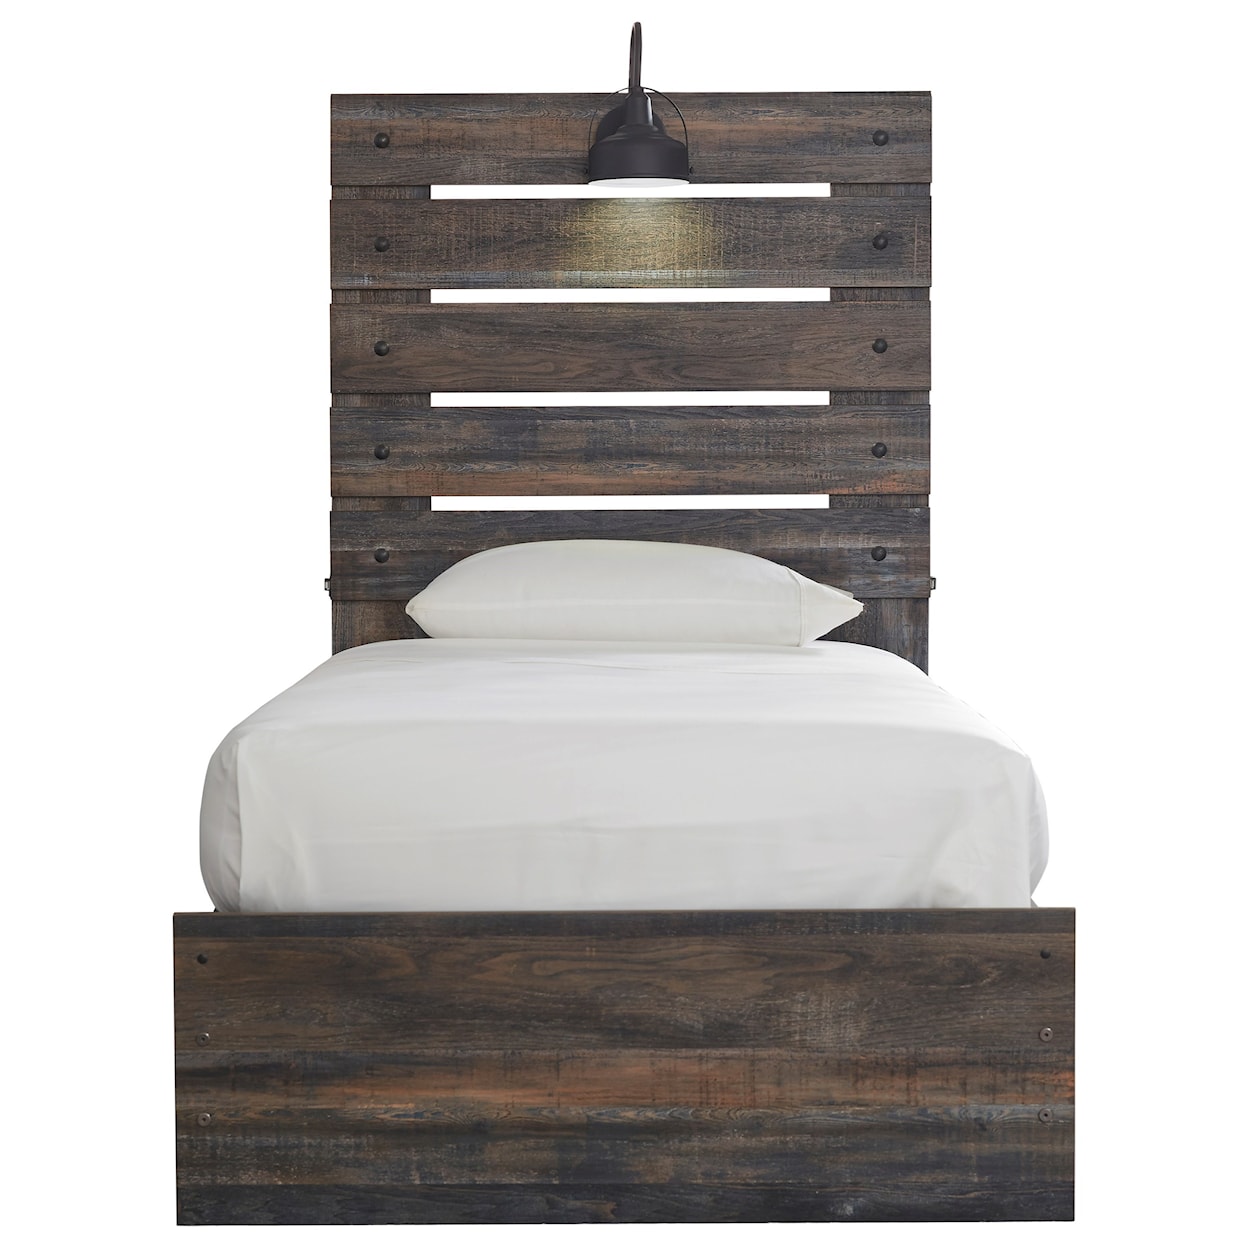 Signature Design by Ashley Drystan Twin Storage Bed with 4 Drawers